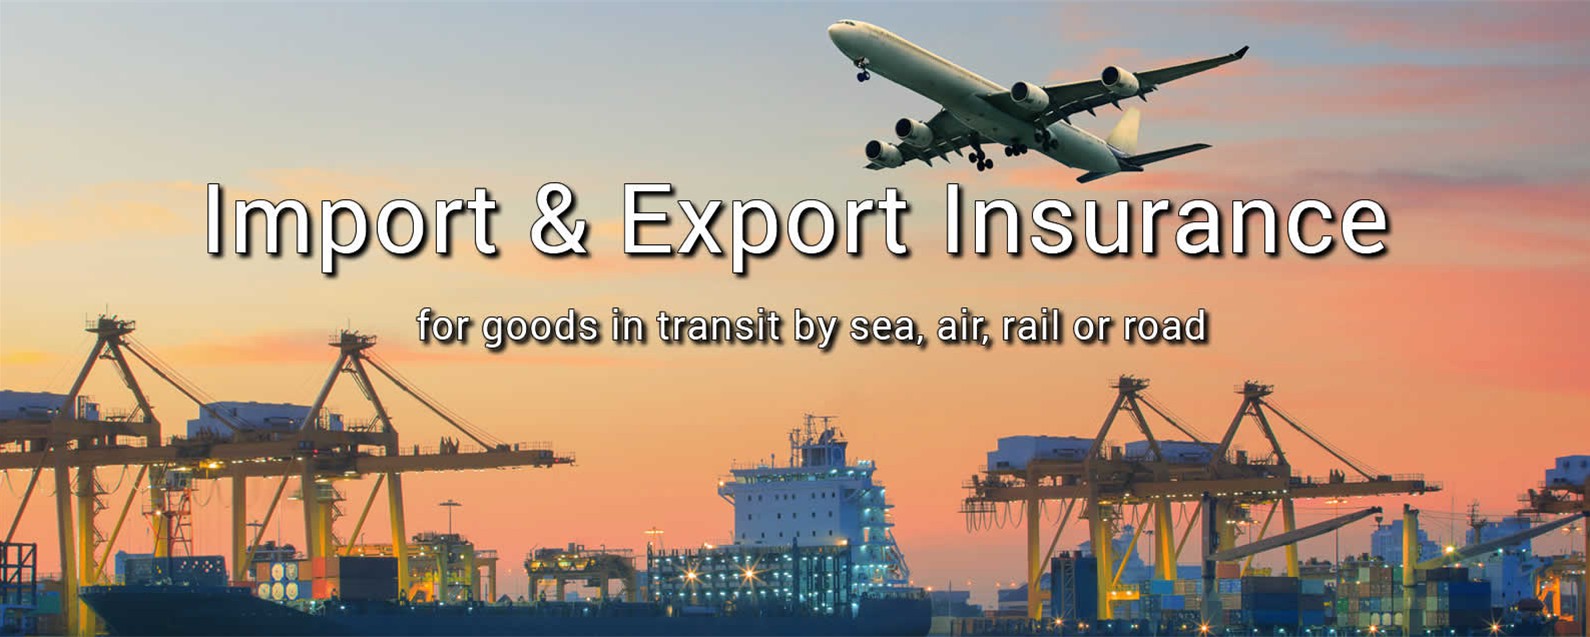 Goods for import or export